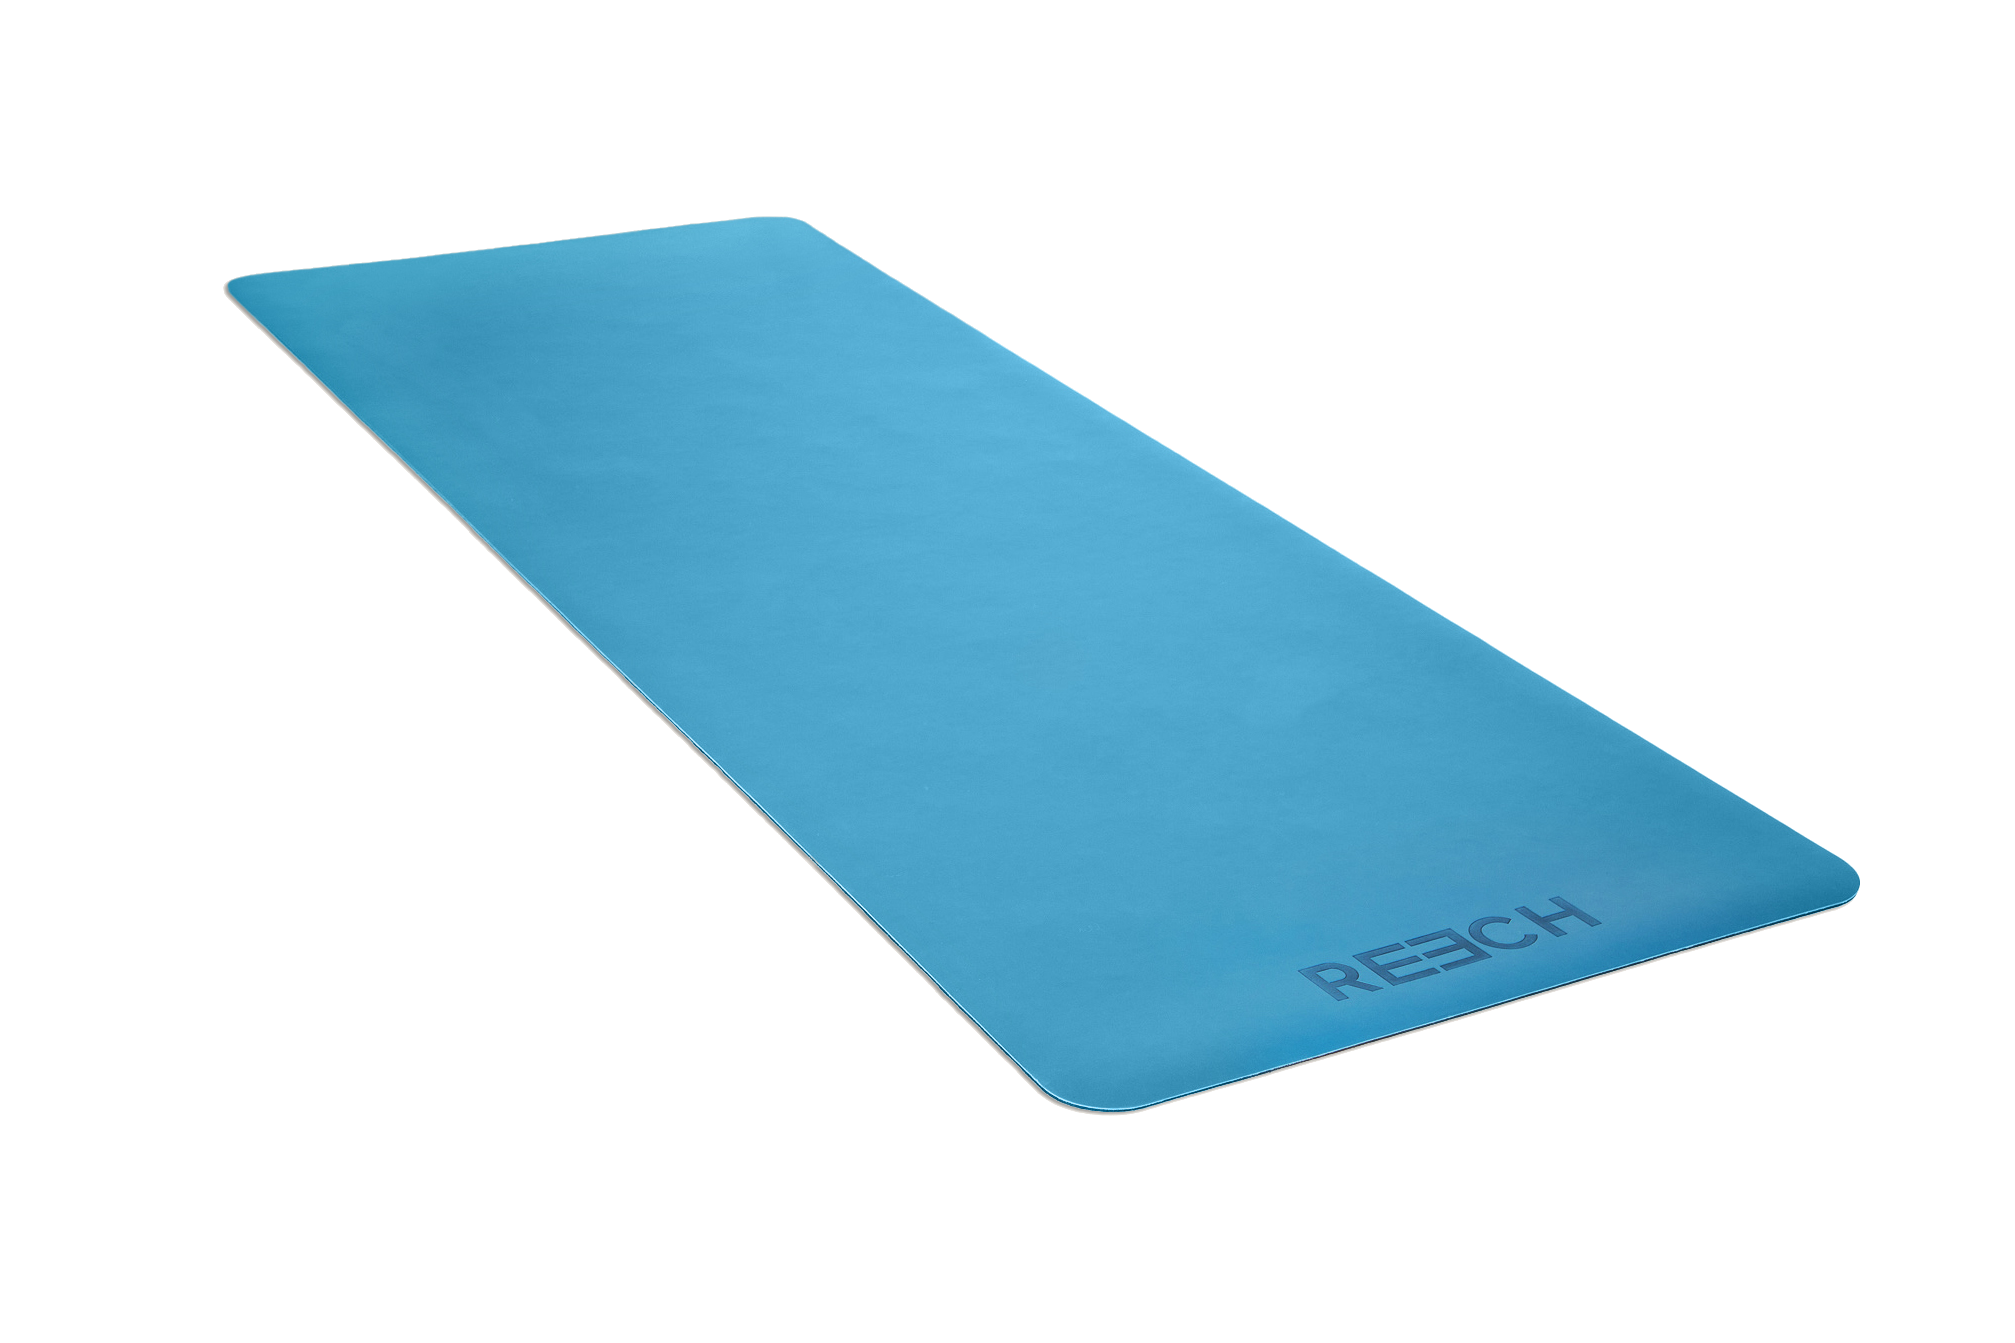 Flat blue anti-bacterial & anti-microbial namaSTAY yoga mat on the ground.